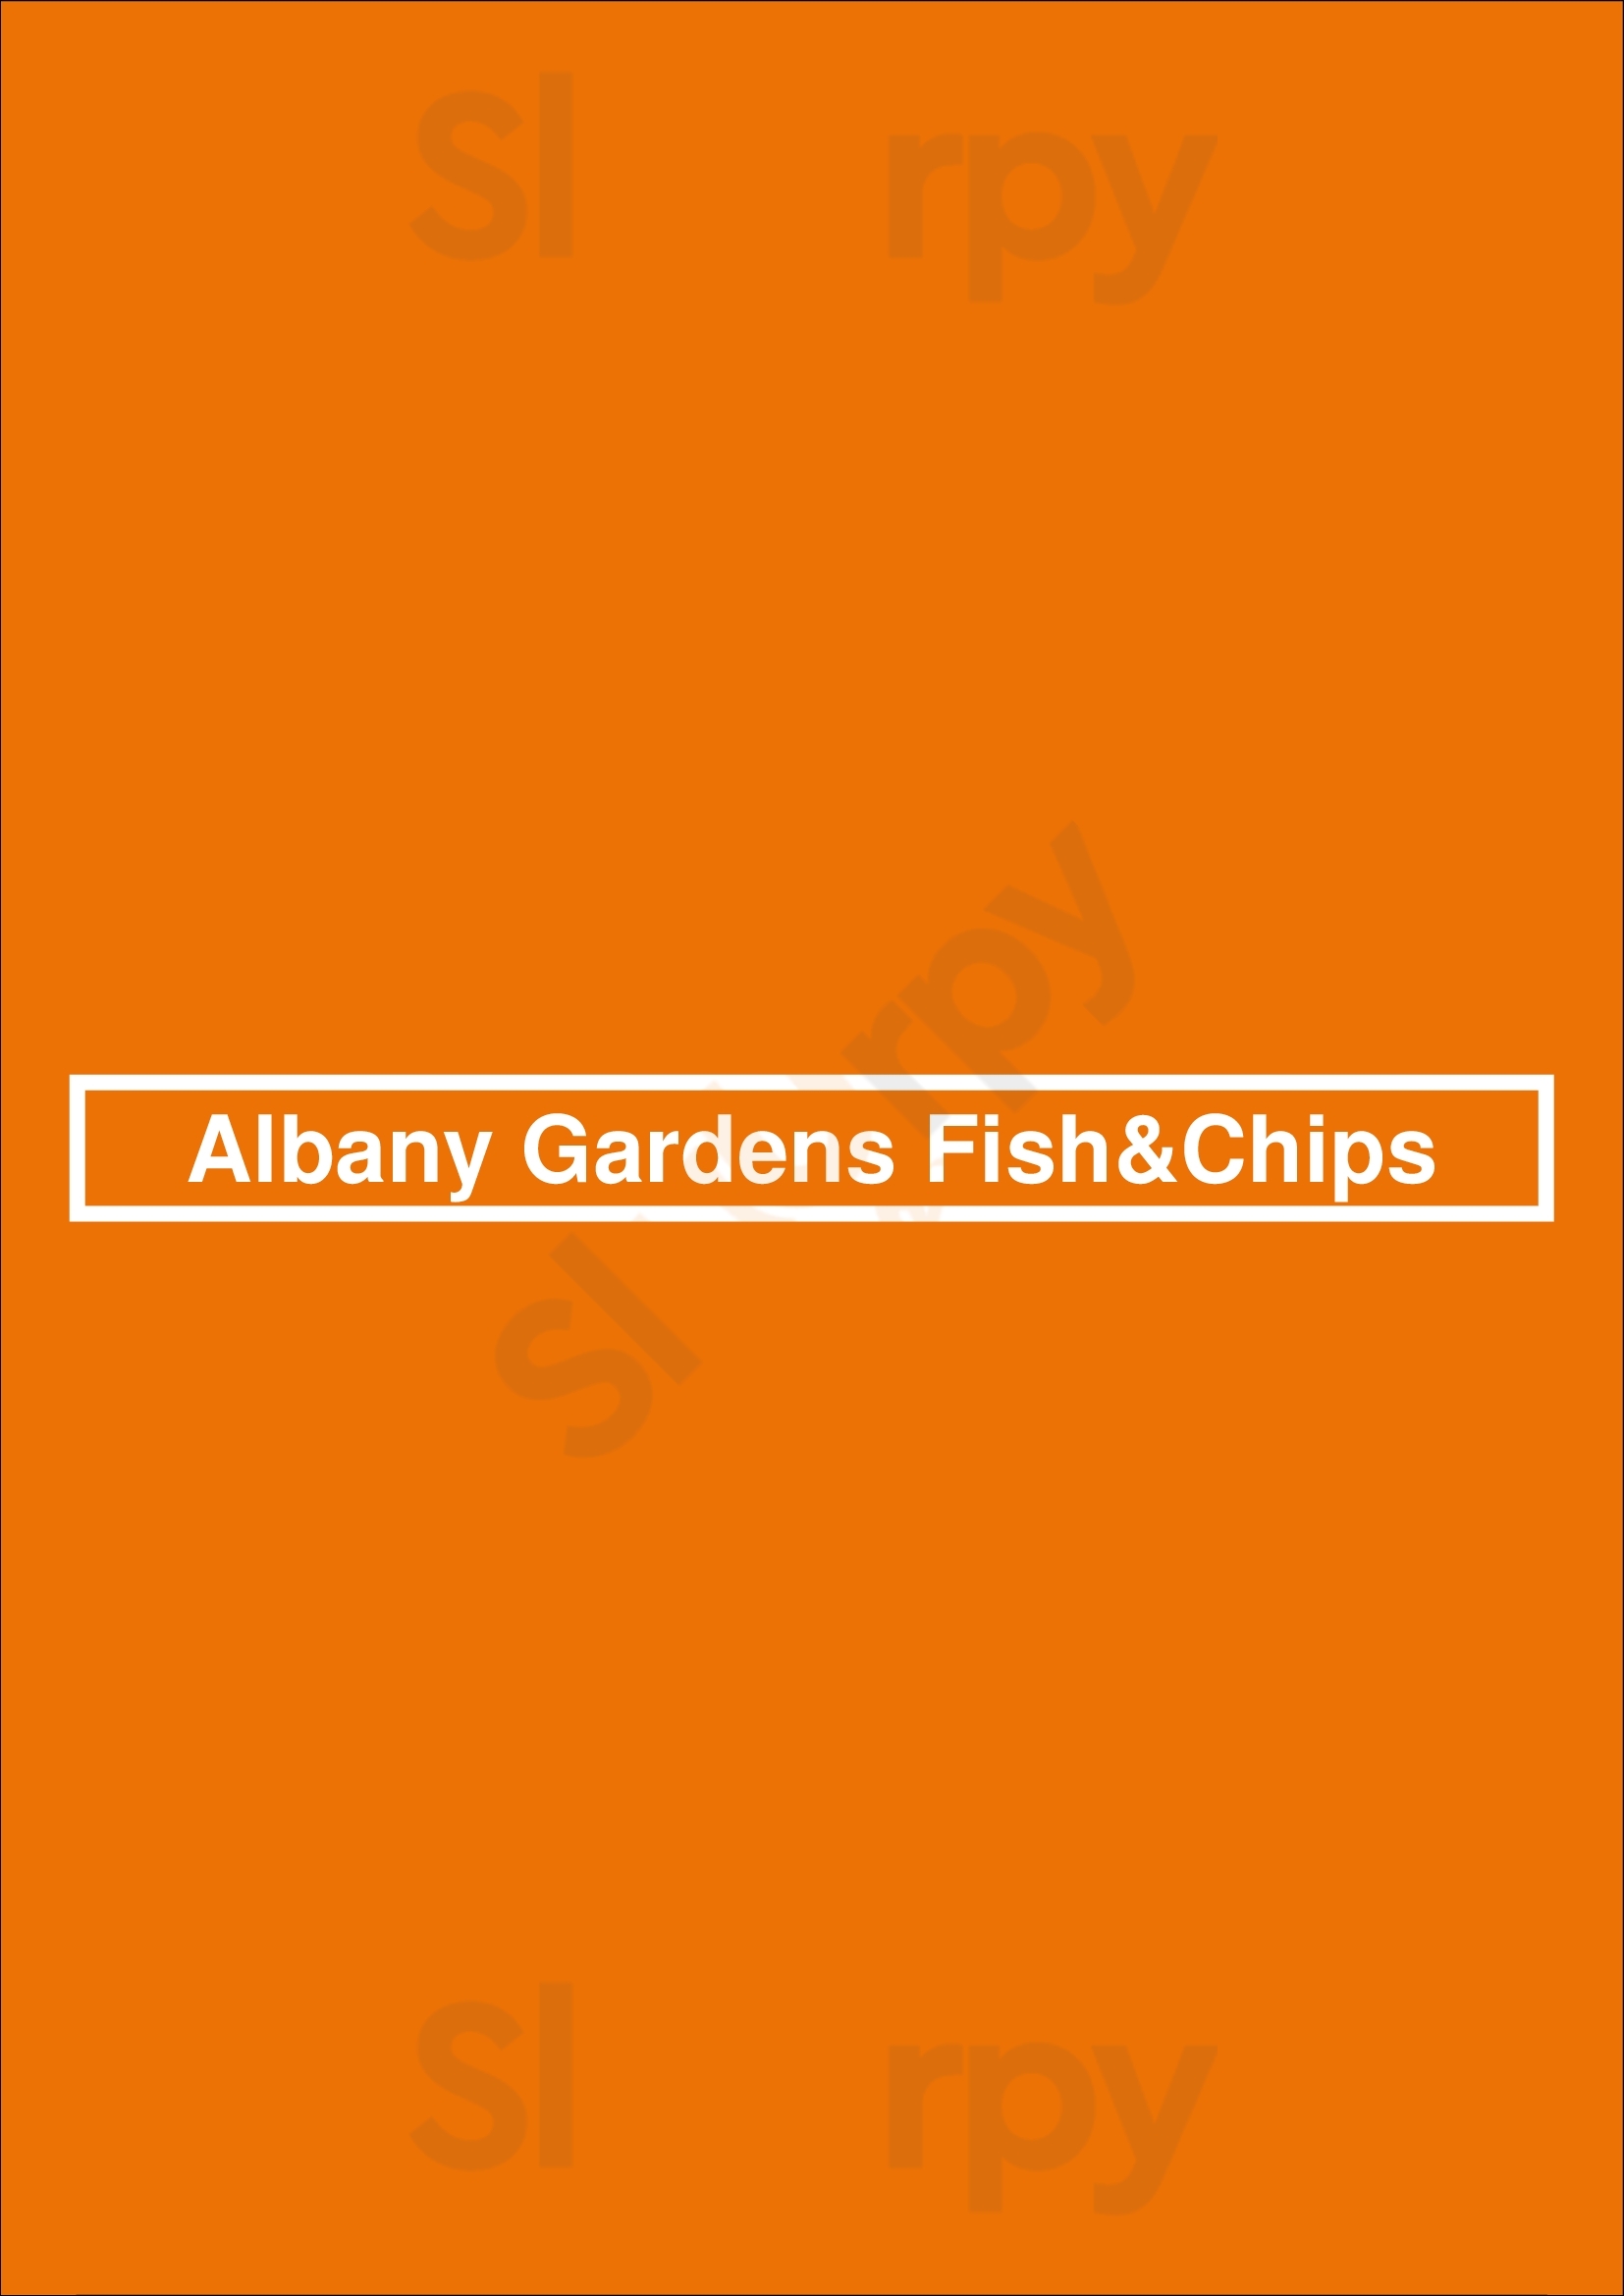 Albany Gardens Fish&chips Colchester Menu - 1